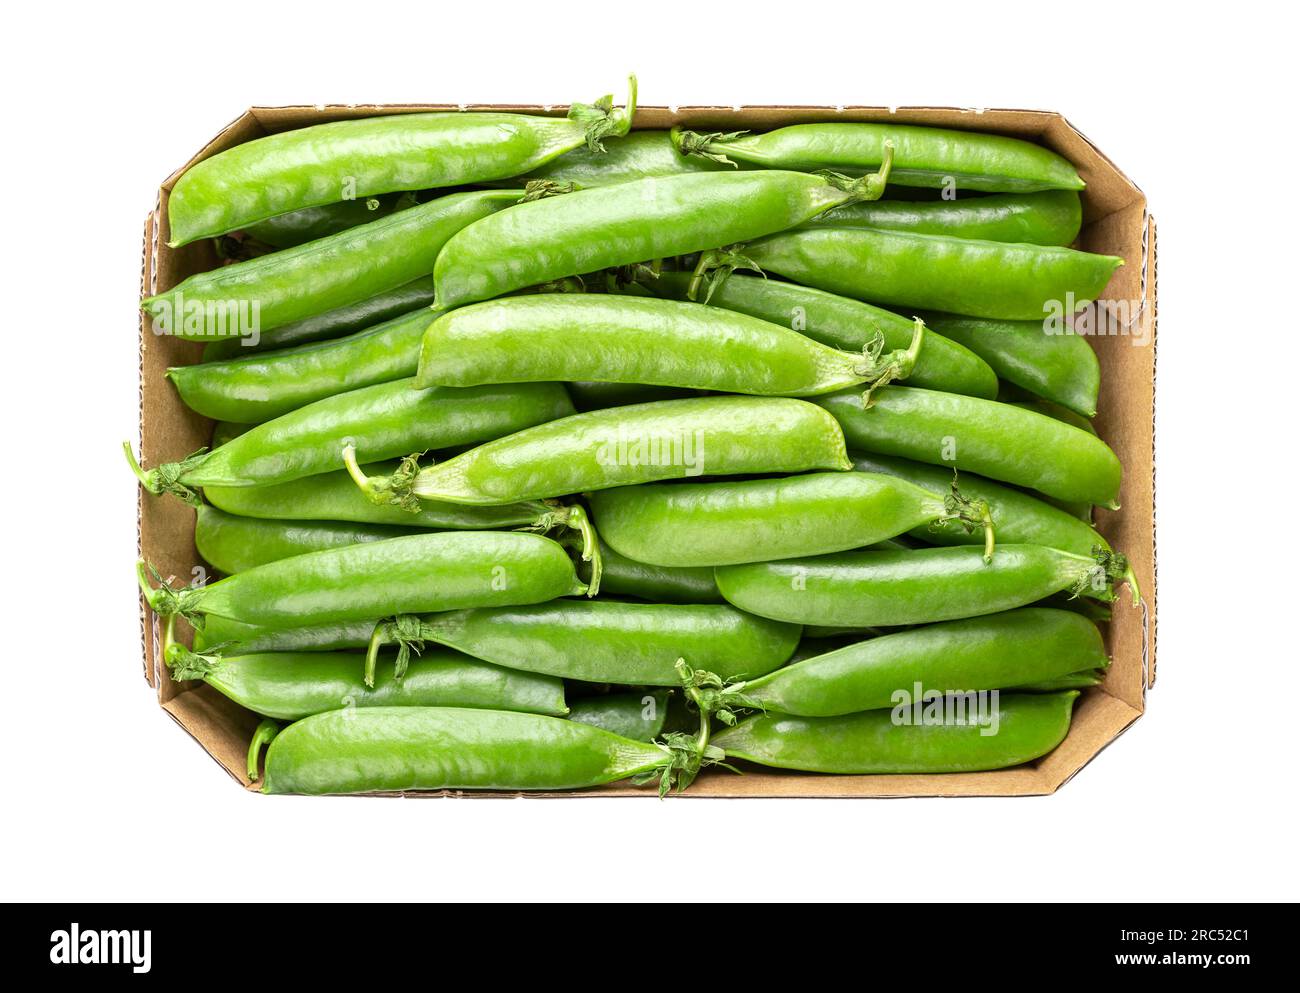 Cardboard punnet with fresh pea pods, containing green peas, the fruits and seeds of the plant Pisum sativum. Used fresh, frozen, dried or canned. Stock Photo